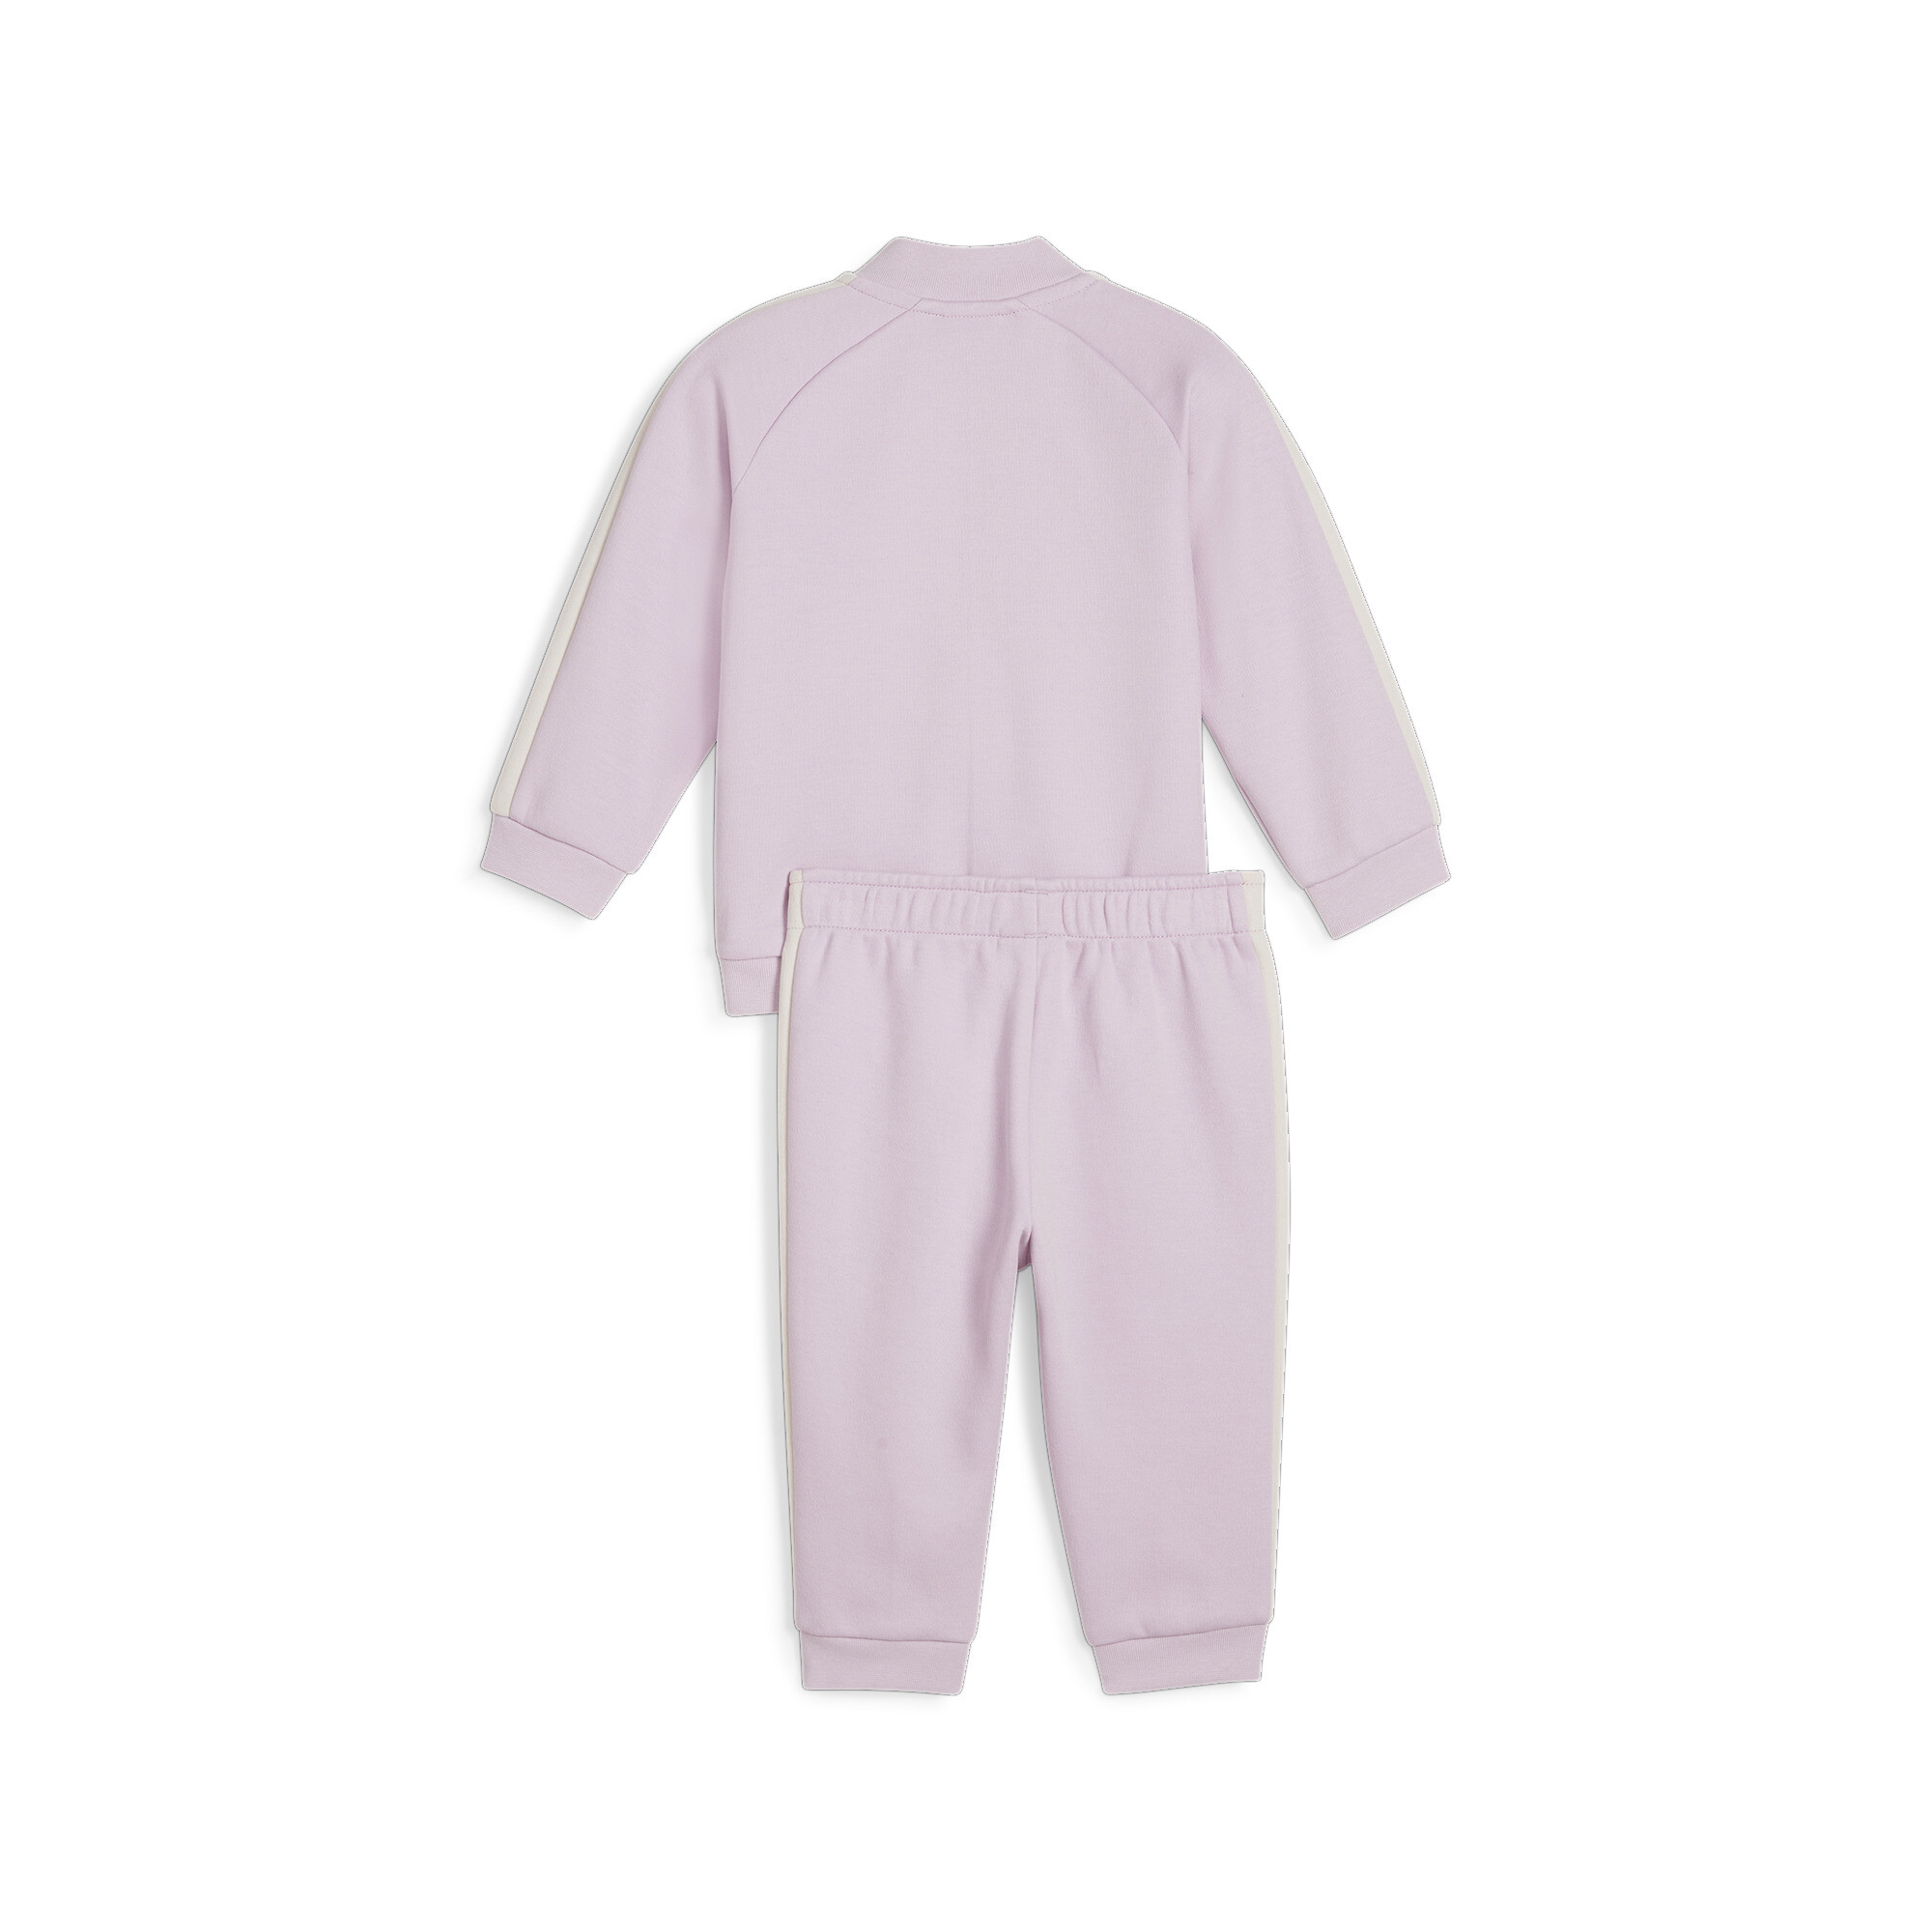 Kids' PUMA MINICATS T7 ICONIC Baby Tracksuit Set In 90 - Purple, Size 4-6 Months